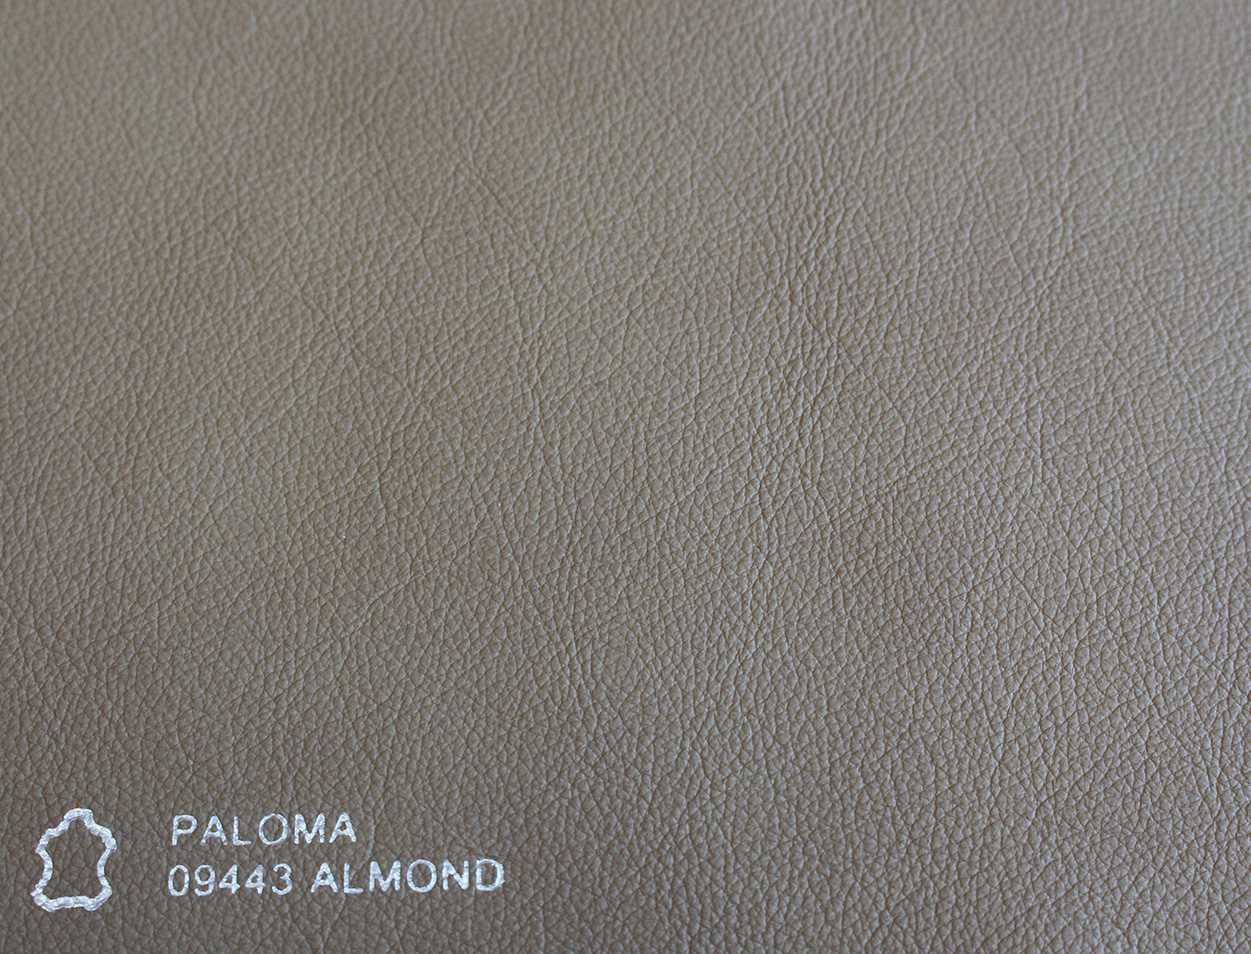 Stressless Paloma Almond Leather 094 43 from Ekornes